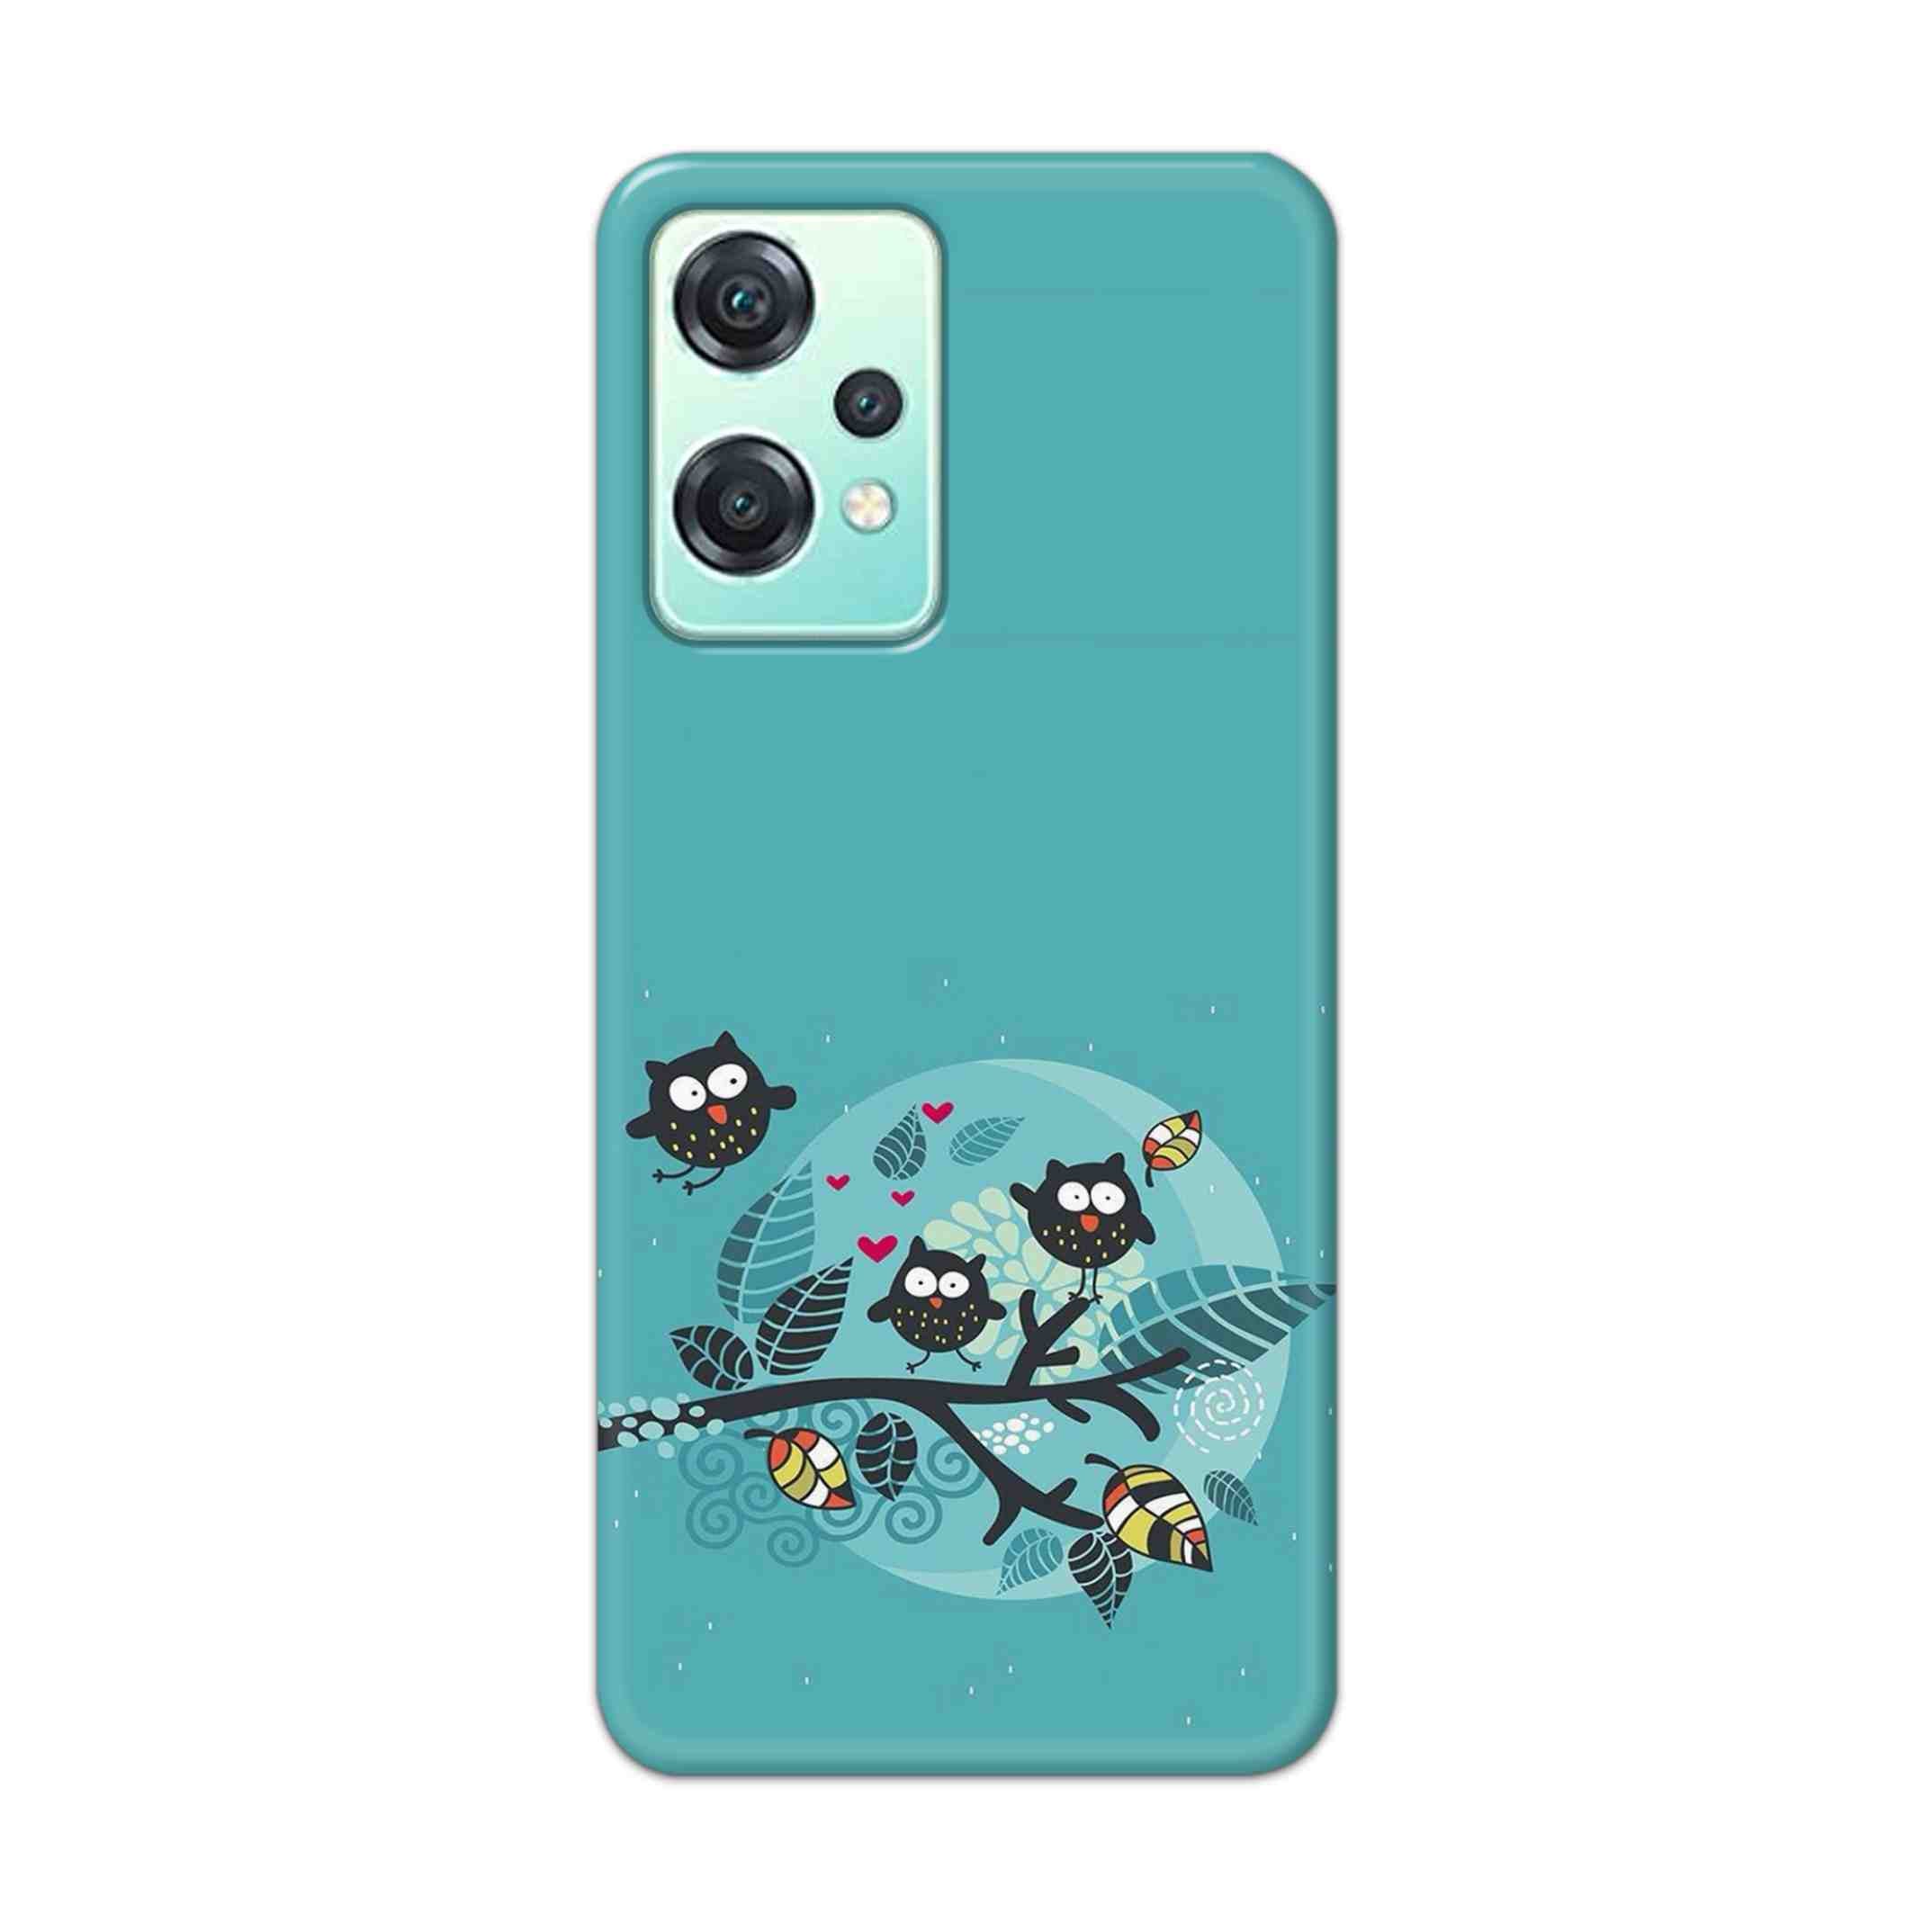 Buy Owl Hard Back Mobile Phone Case Cover For OnePlus Nord CE 2 Lite 5G Online